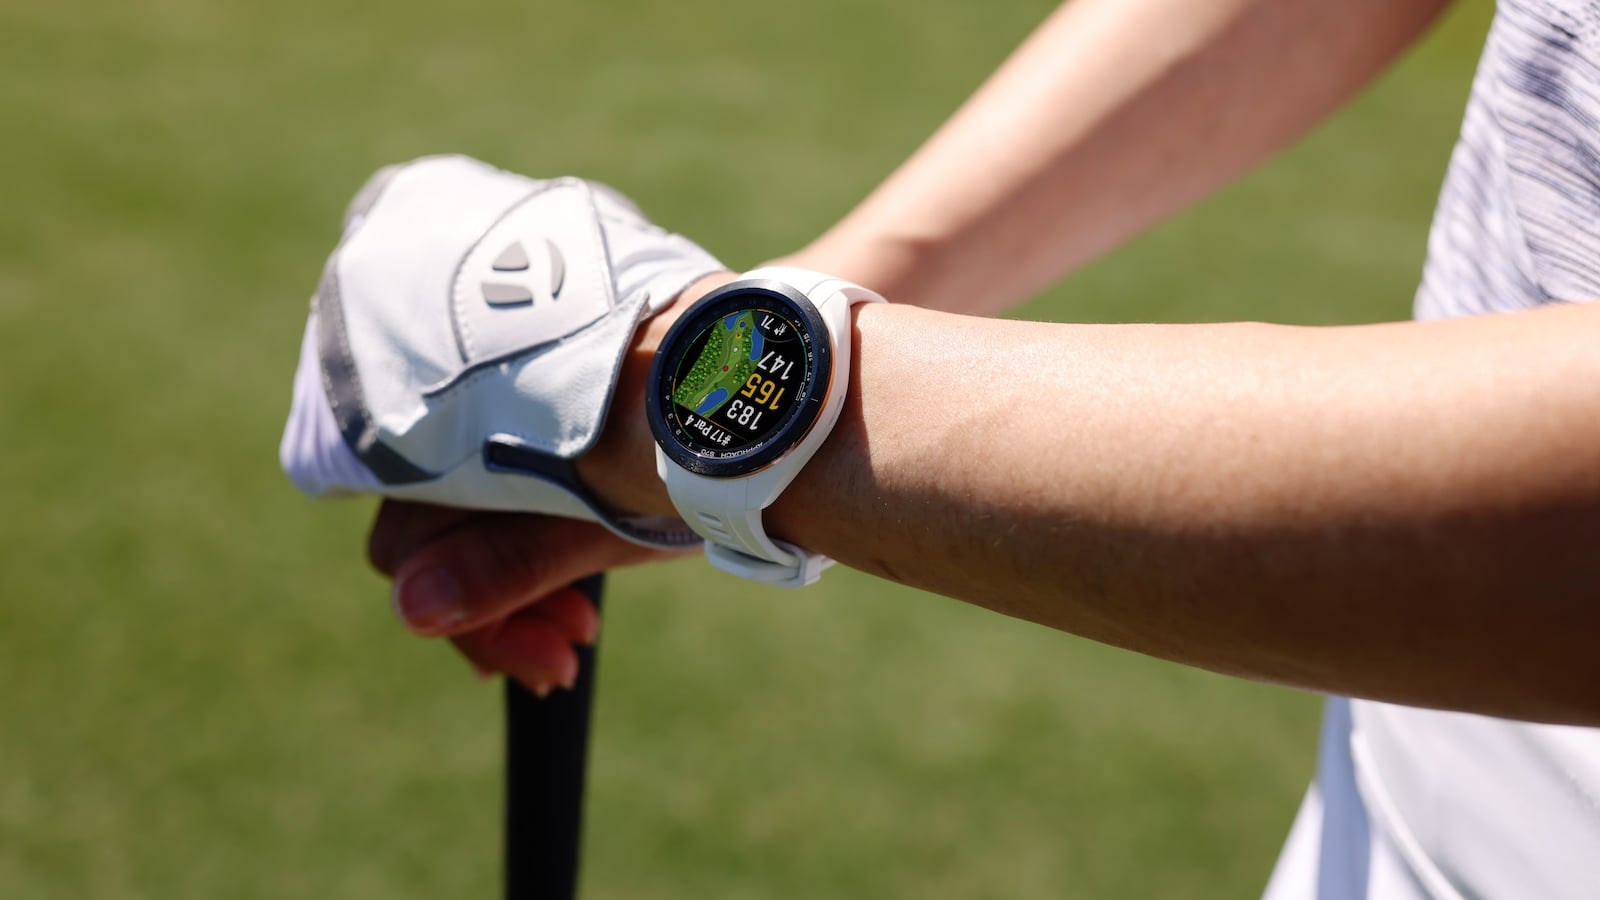 Ticwatch Pro 3 Specifications, Features and Price - Geeky Wrist